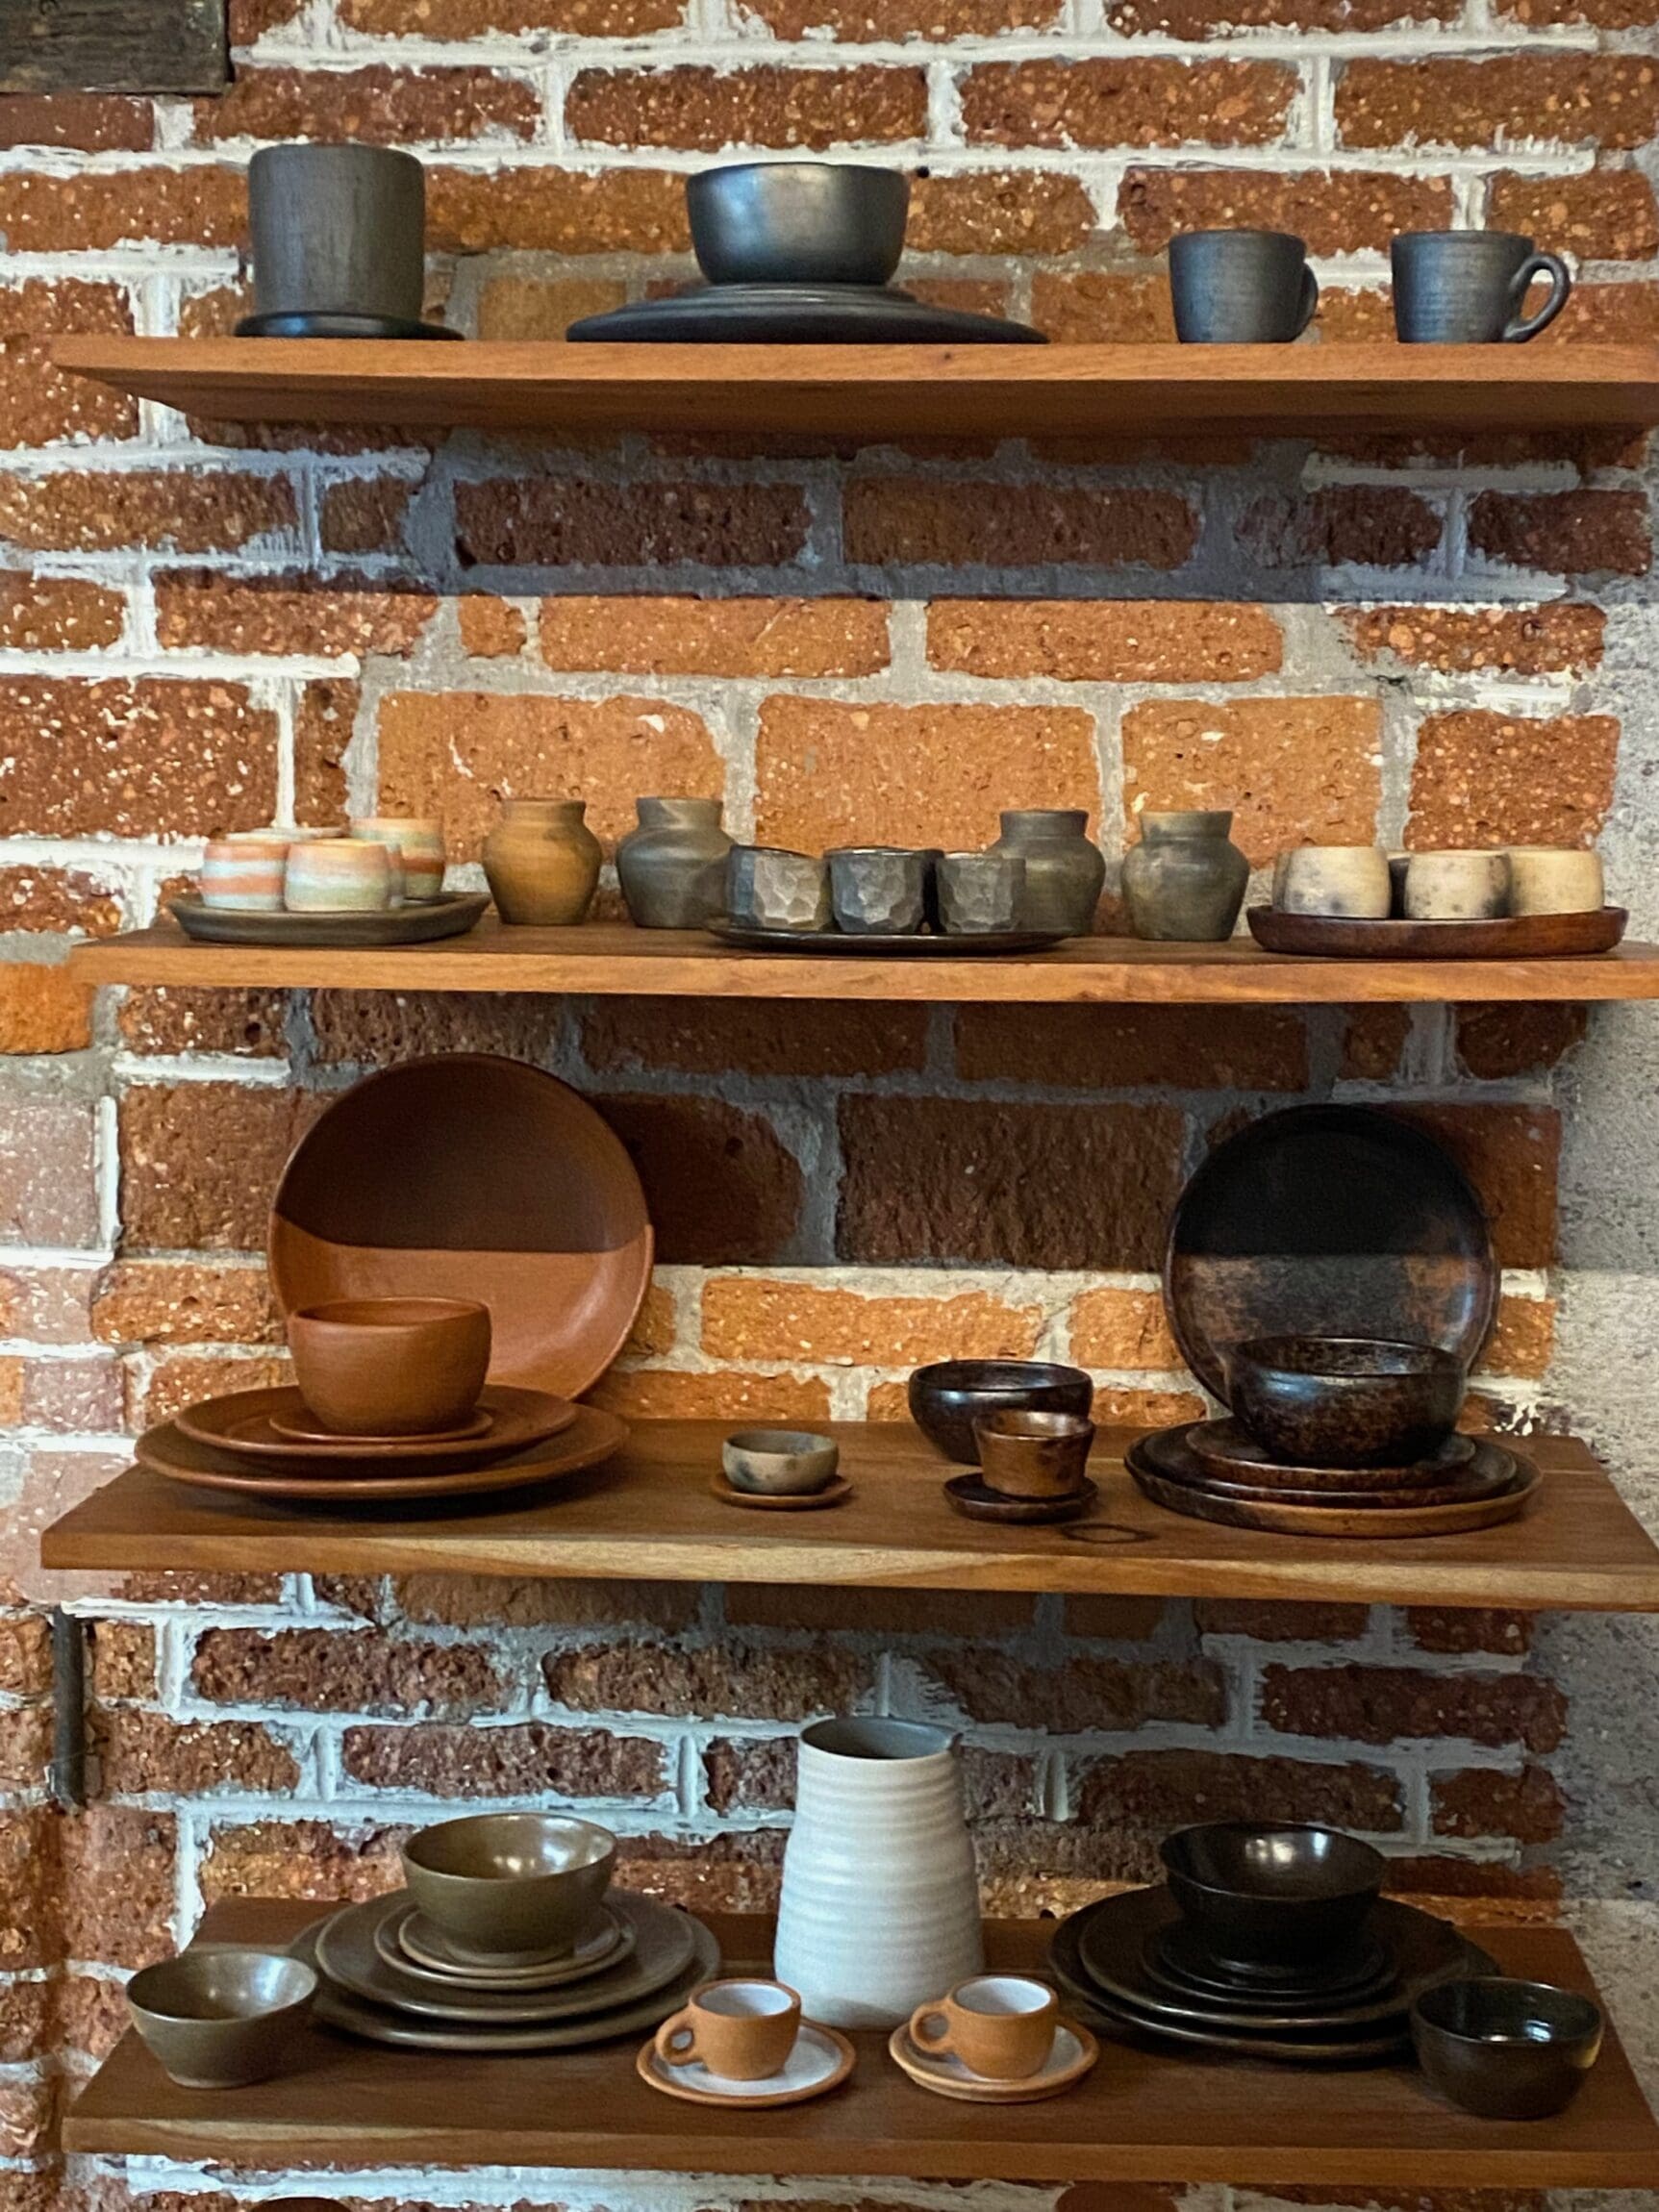 The best shops in Mexico City | Ceramics on display at Tetetlán